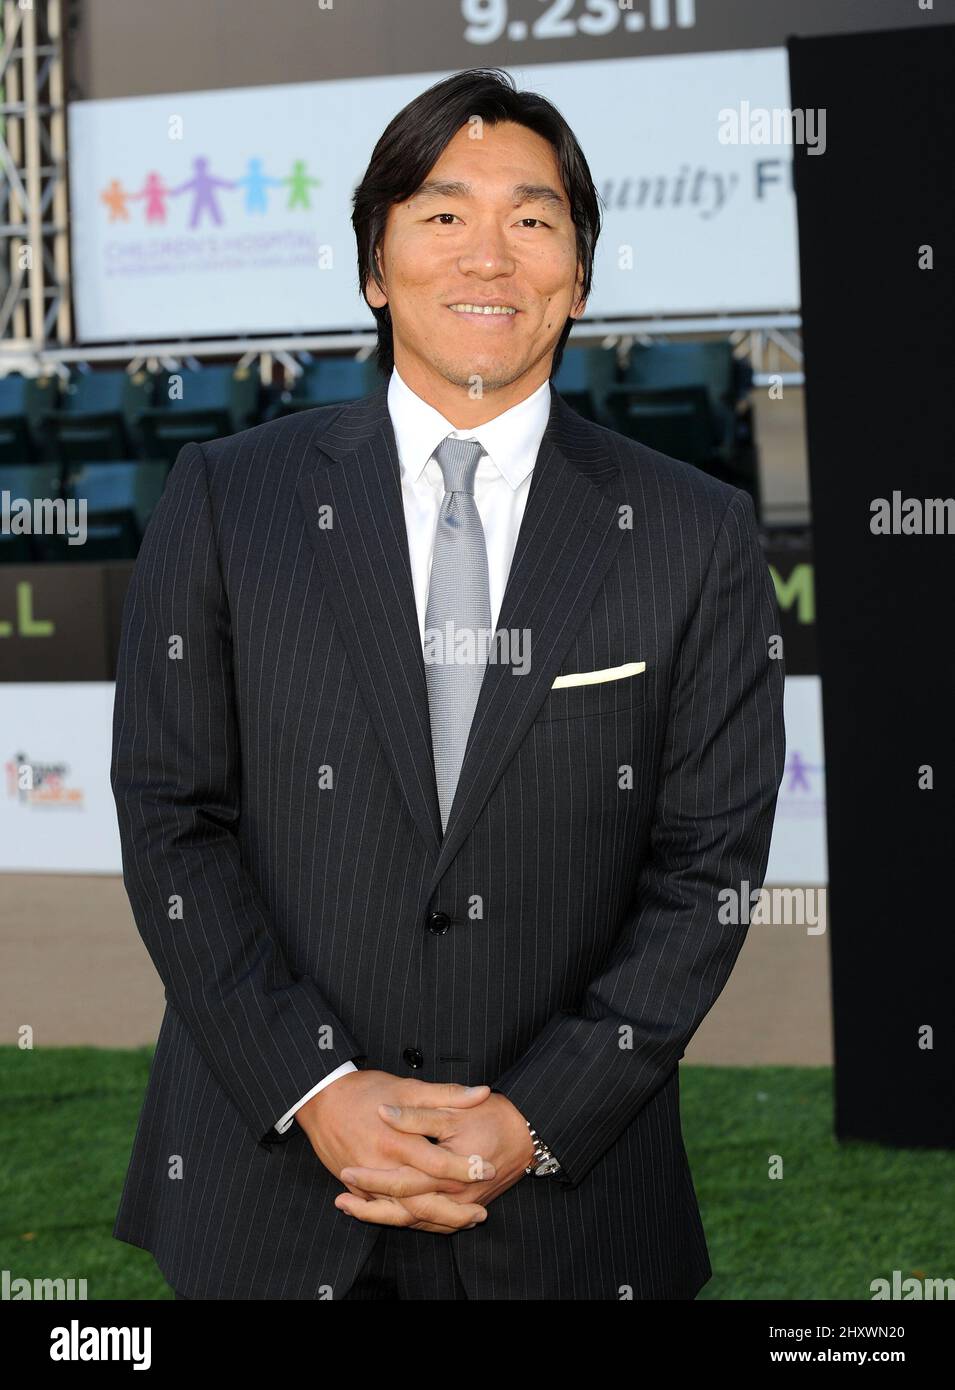 Hideki Matsui arriving at the 'Moneyball' World Premiere held at the Paramount Theatre of Arts in Oakland in California, USA. Stock Photo